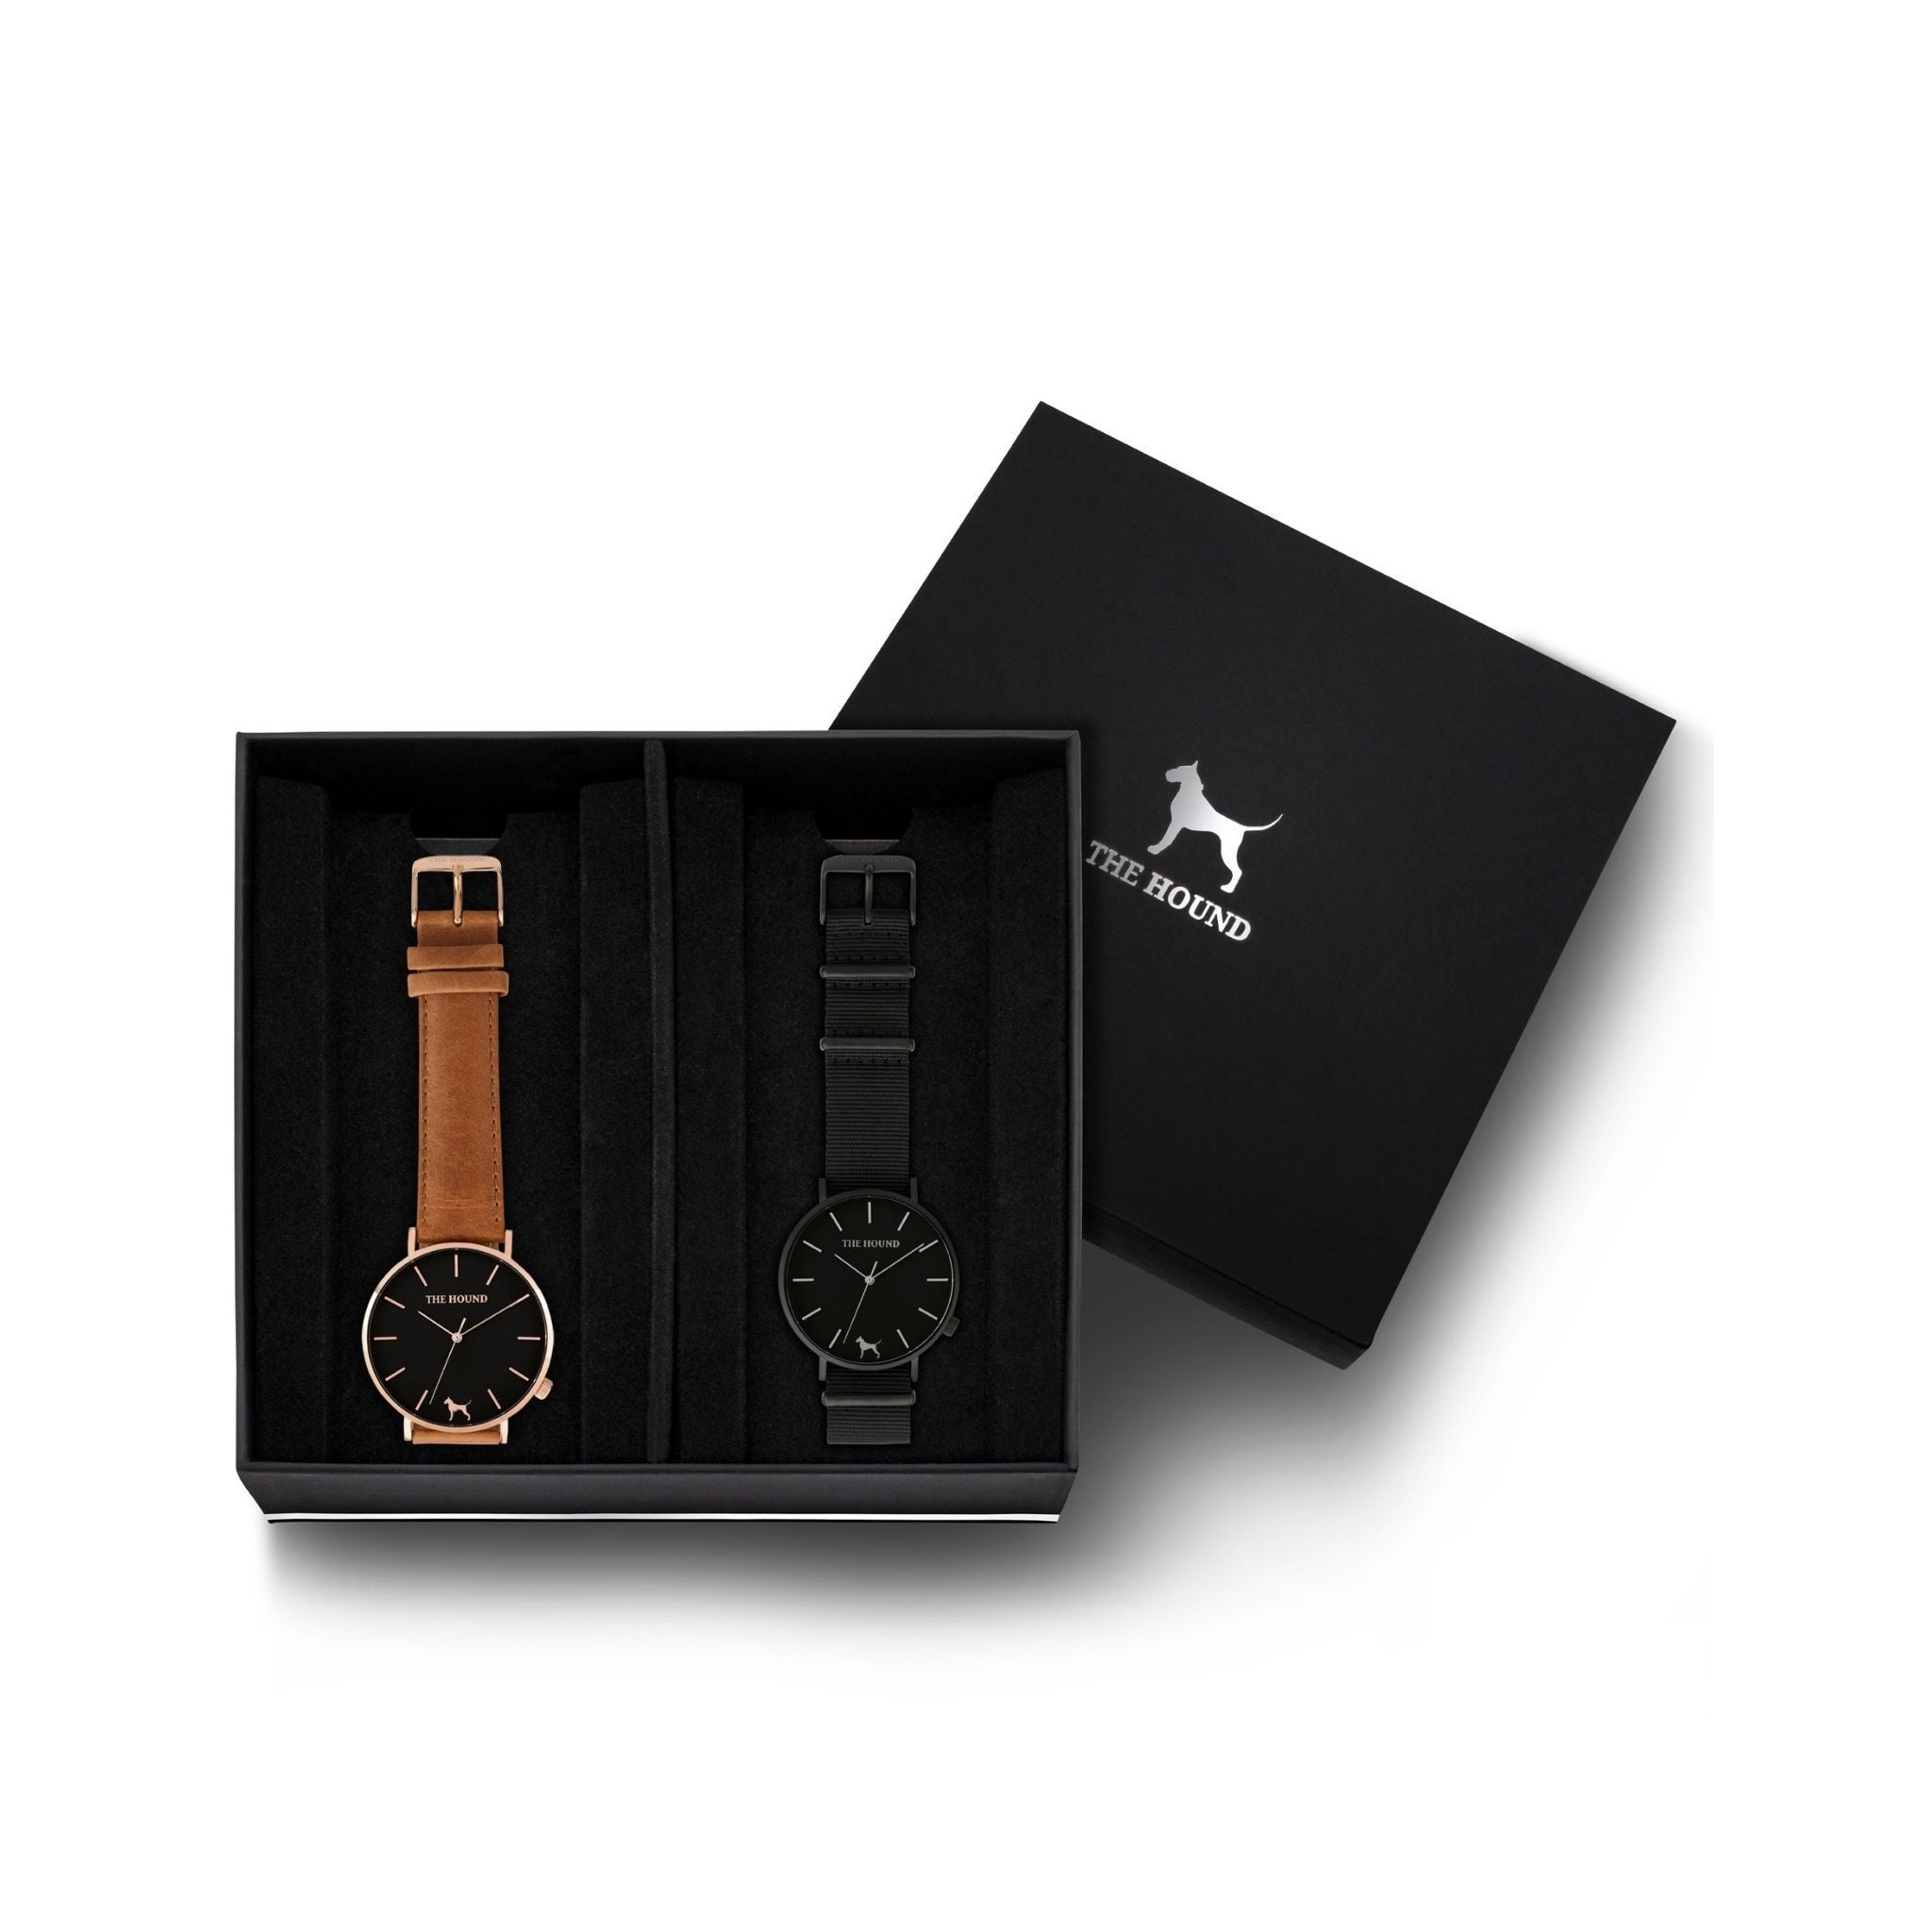 Custom gift set - Rose gold and black watch with stitched tan genuine leather band and a matte black and black watch with black nato leather band